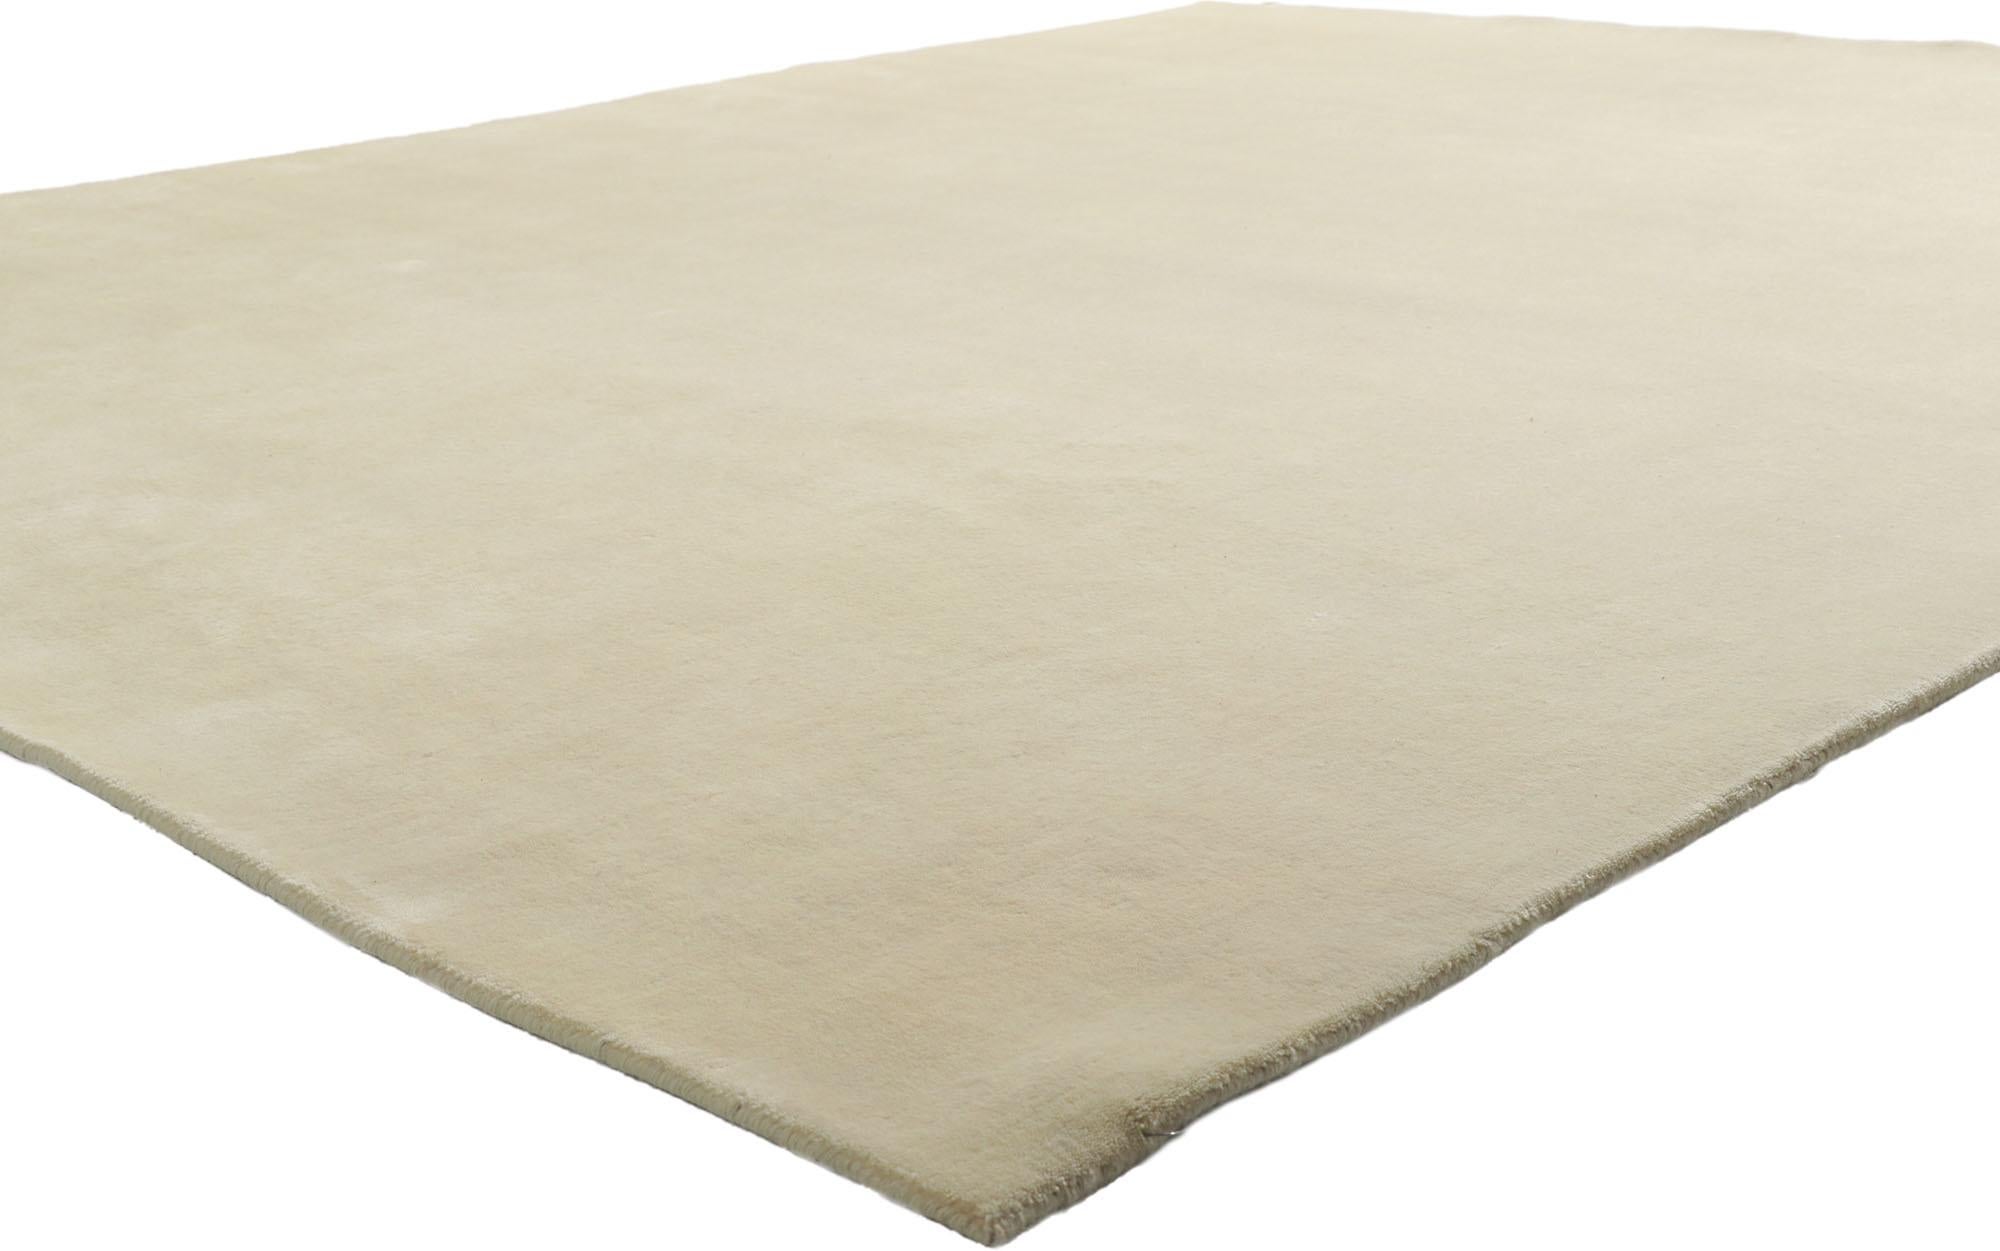 30752 New Contemporary Ivory Area Rug with Minimalist Style, 08'03 x 10'00. Immersed in a mesmerizing realm of contemporary allure and discreet minimalism, this artisan-crafted wool rug unfolds from the skilled looms of modern India. Its essence